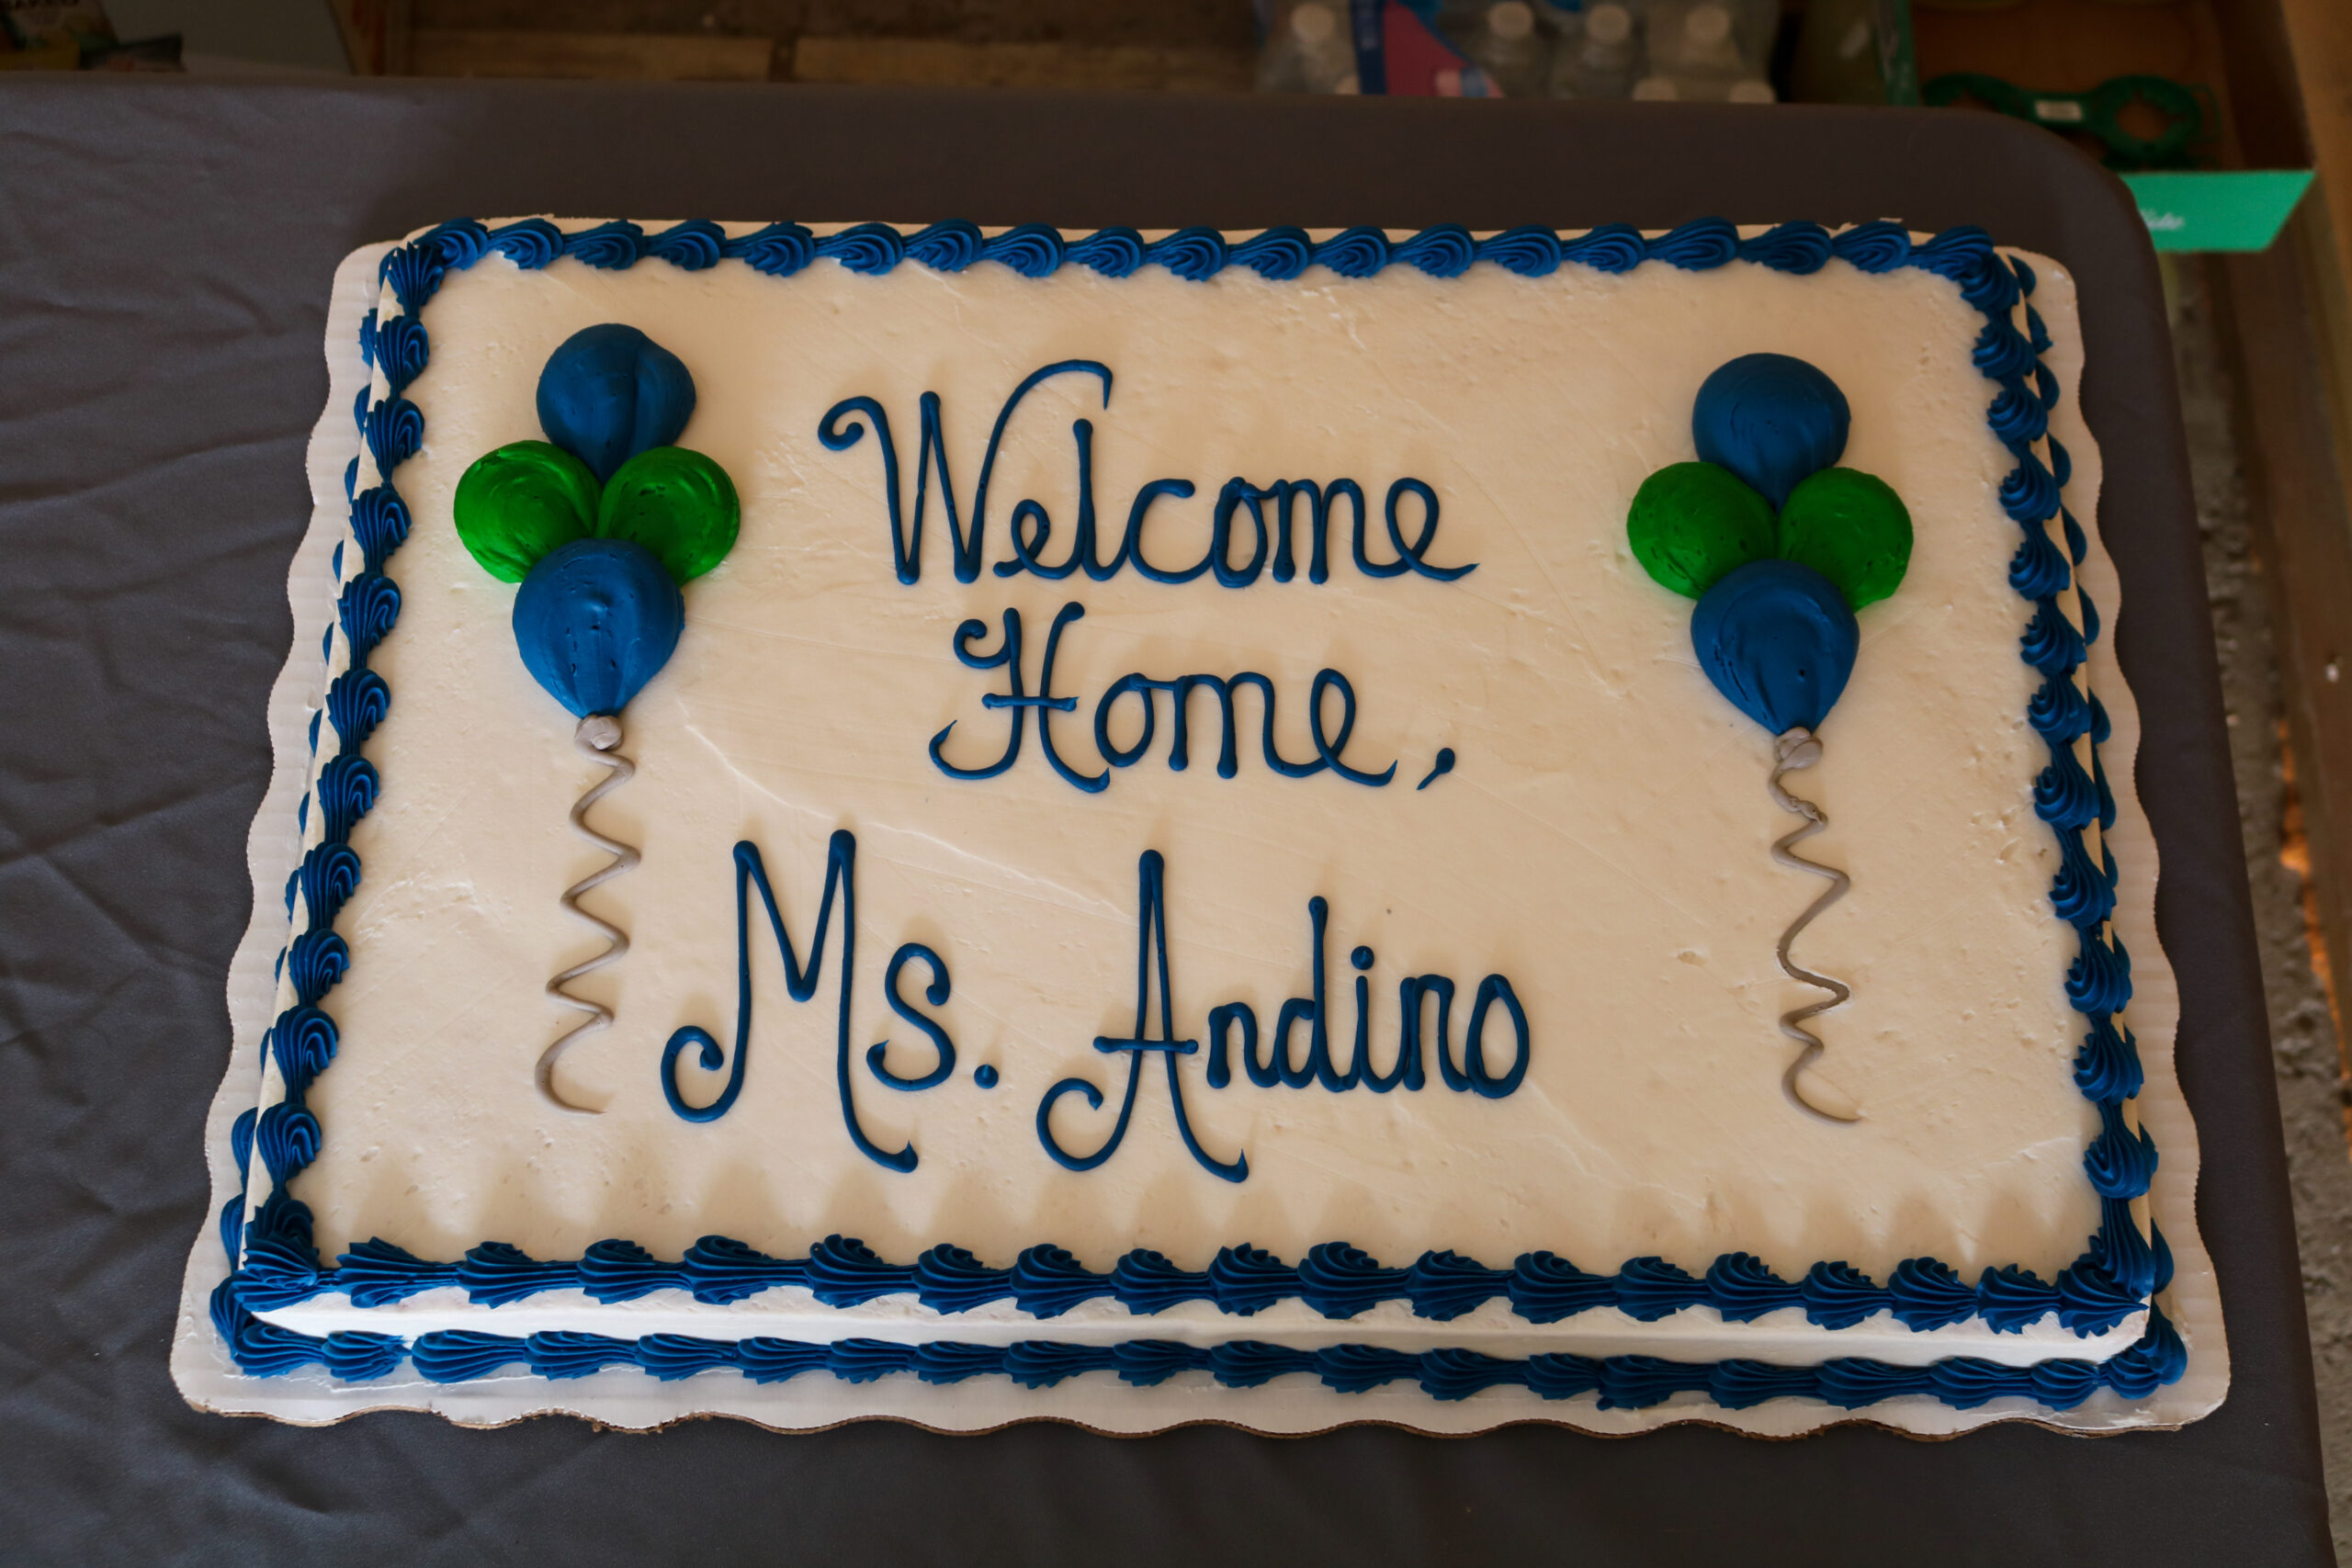 Cake for Ms. Andino